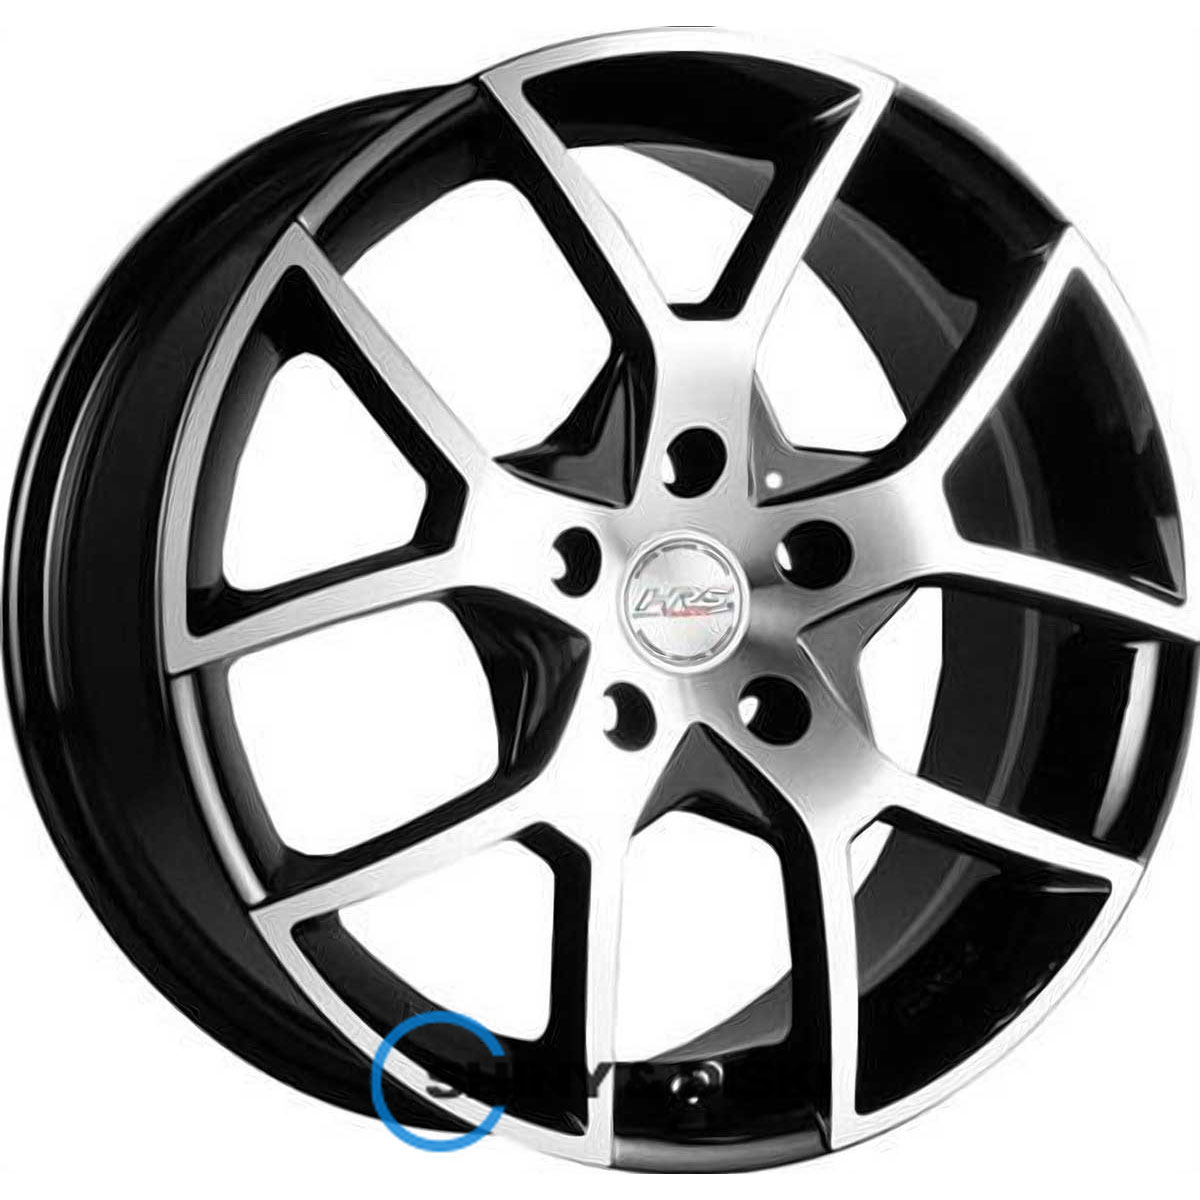 rs tuning h-466 bkfp r15 w6.5 pcd5x114.3 et40 dia73.1